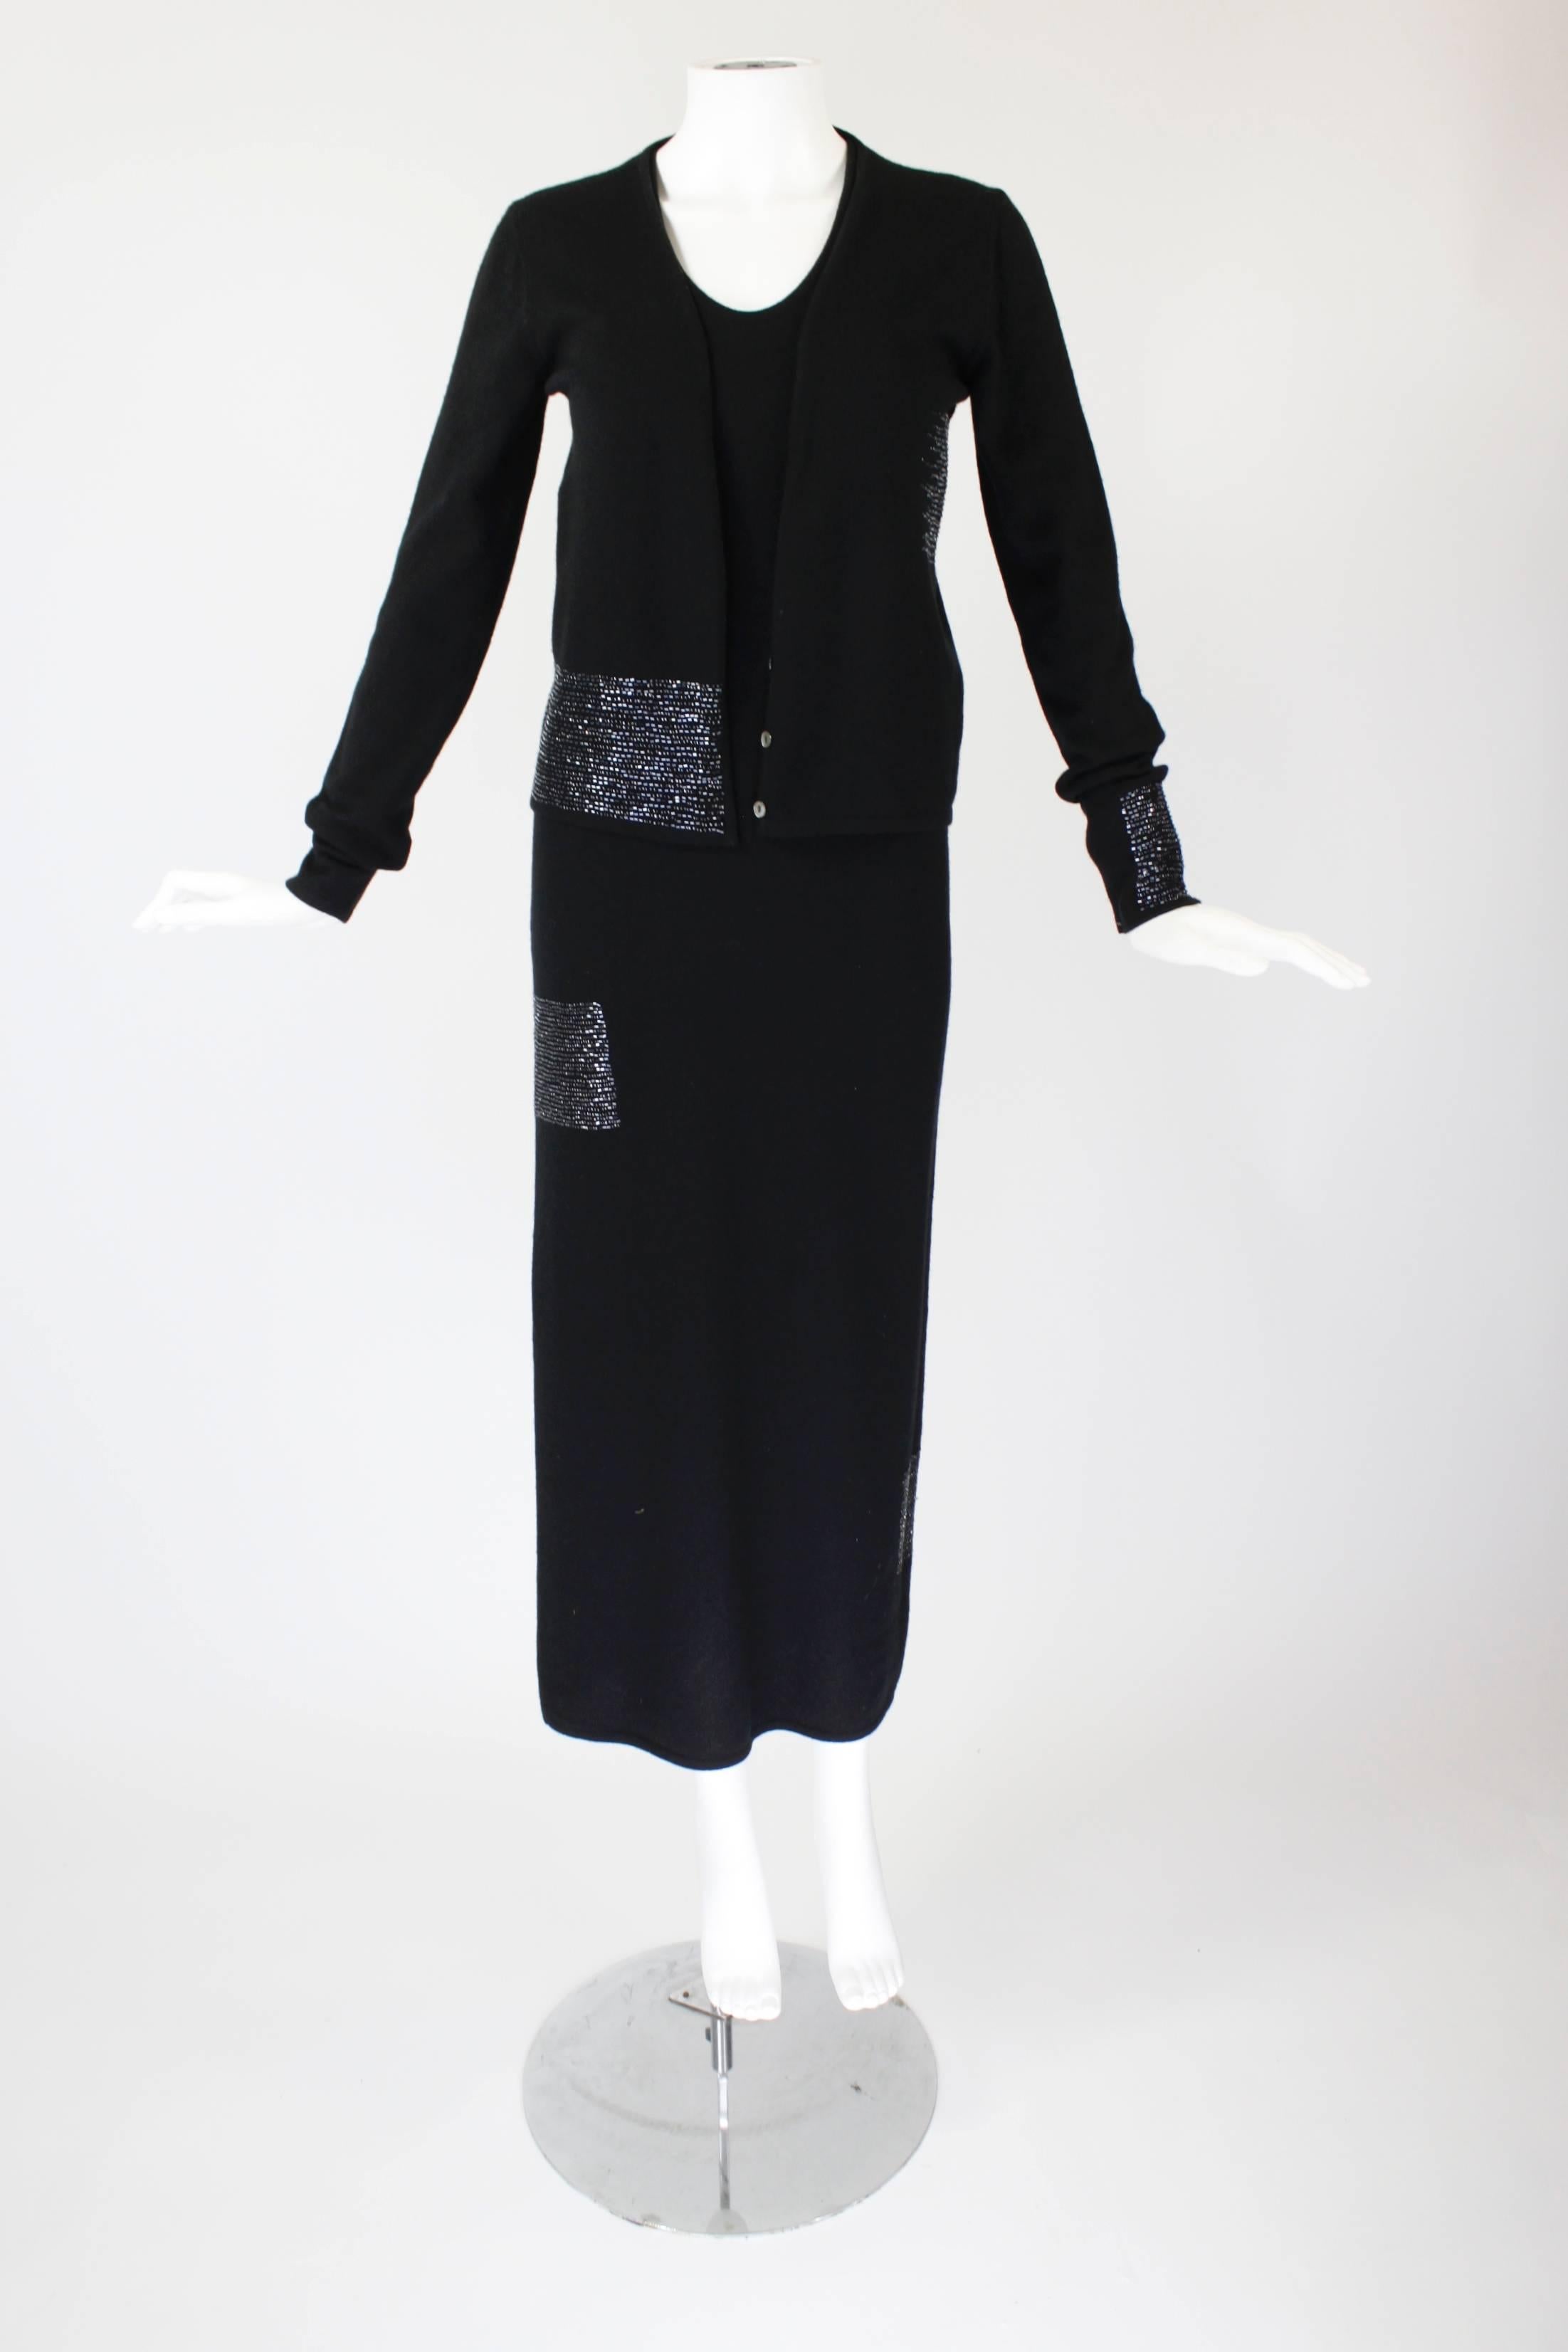 1990s Krizia Black Cashmere Beaded Dress with Shell For Sale 1